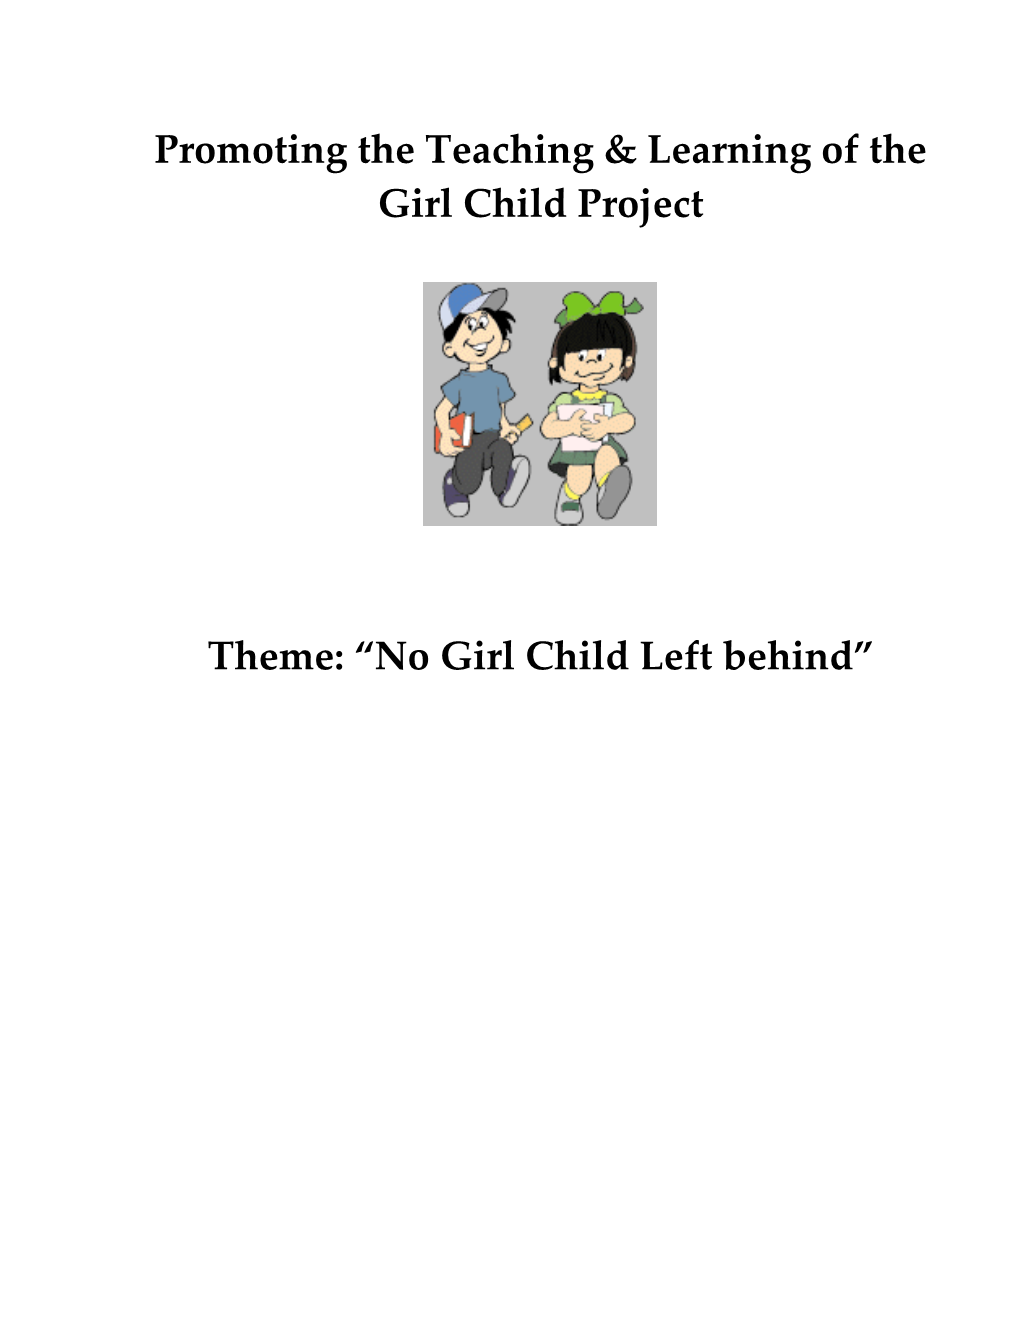 Promoting Girl Child Learning Project